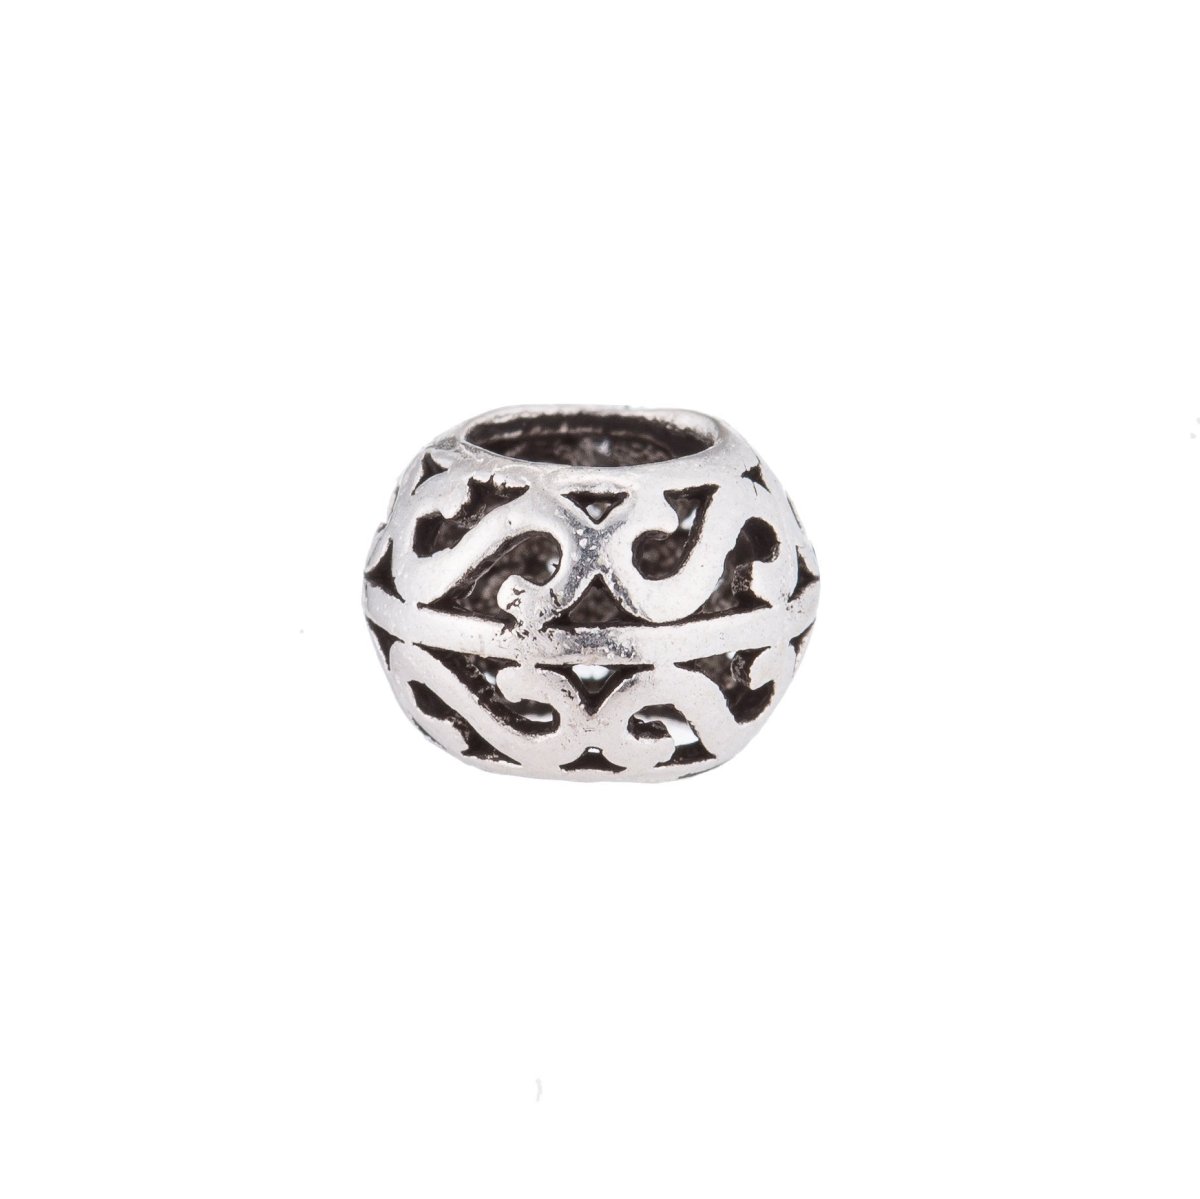 Pandora 925 Sterling Silver Spacer, Infinity, European Style, Bracelet Charm Bead Spacer Connector Pendant Finding For Jewelry Making G-596 - DLUXCA